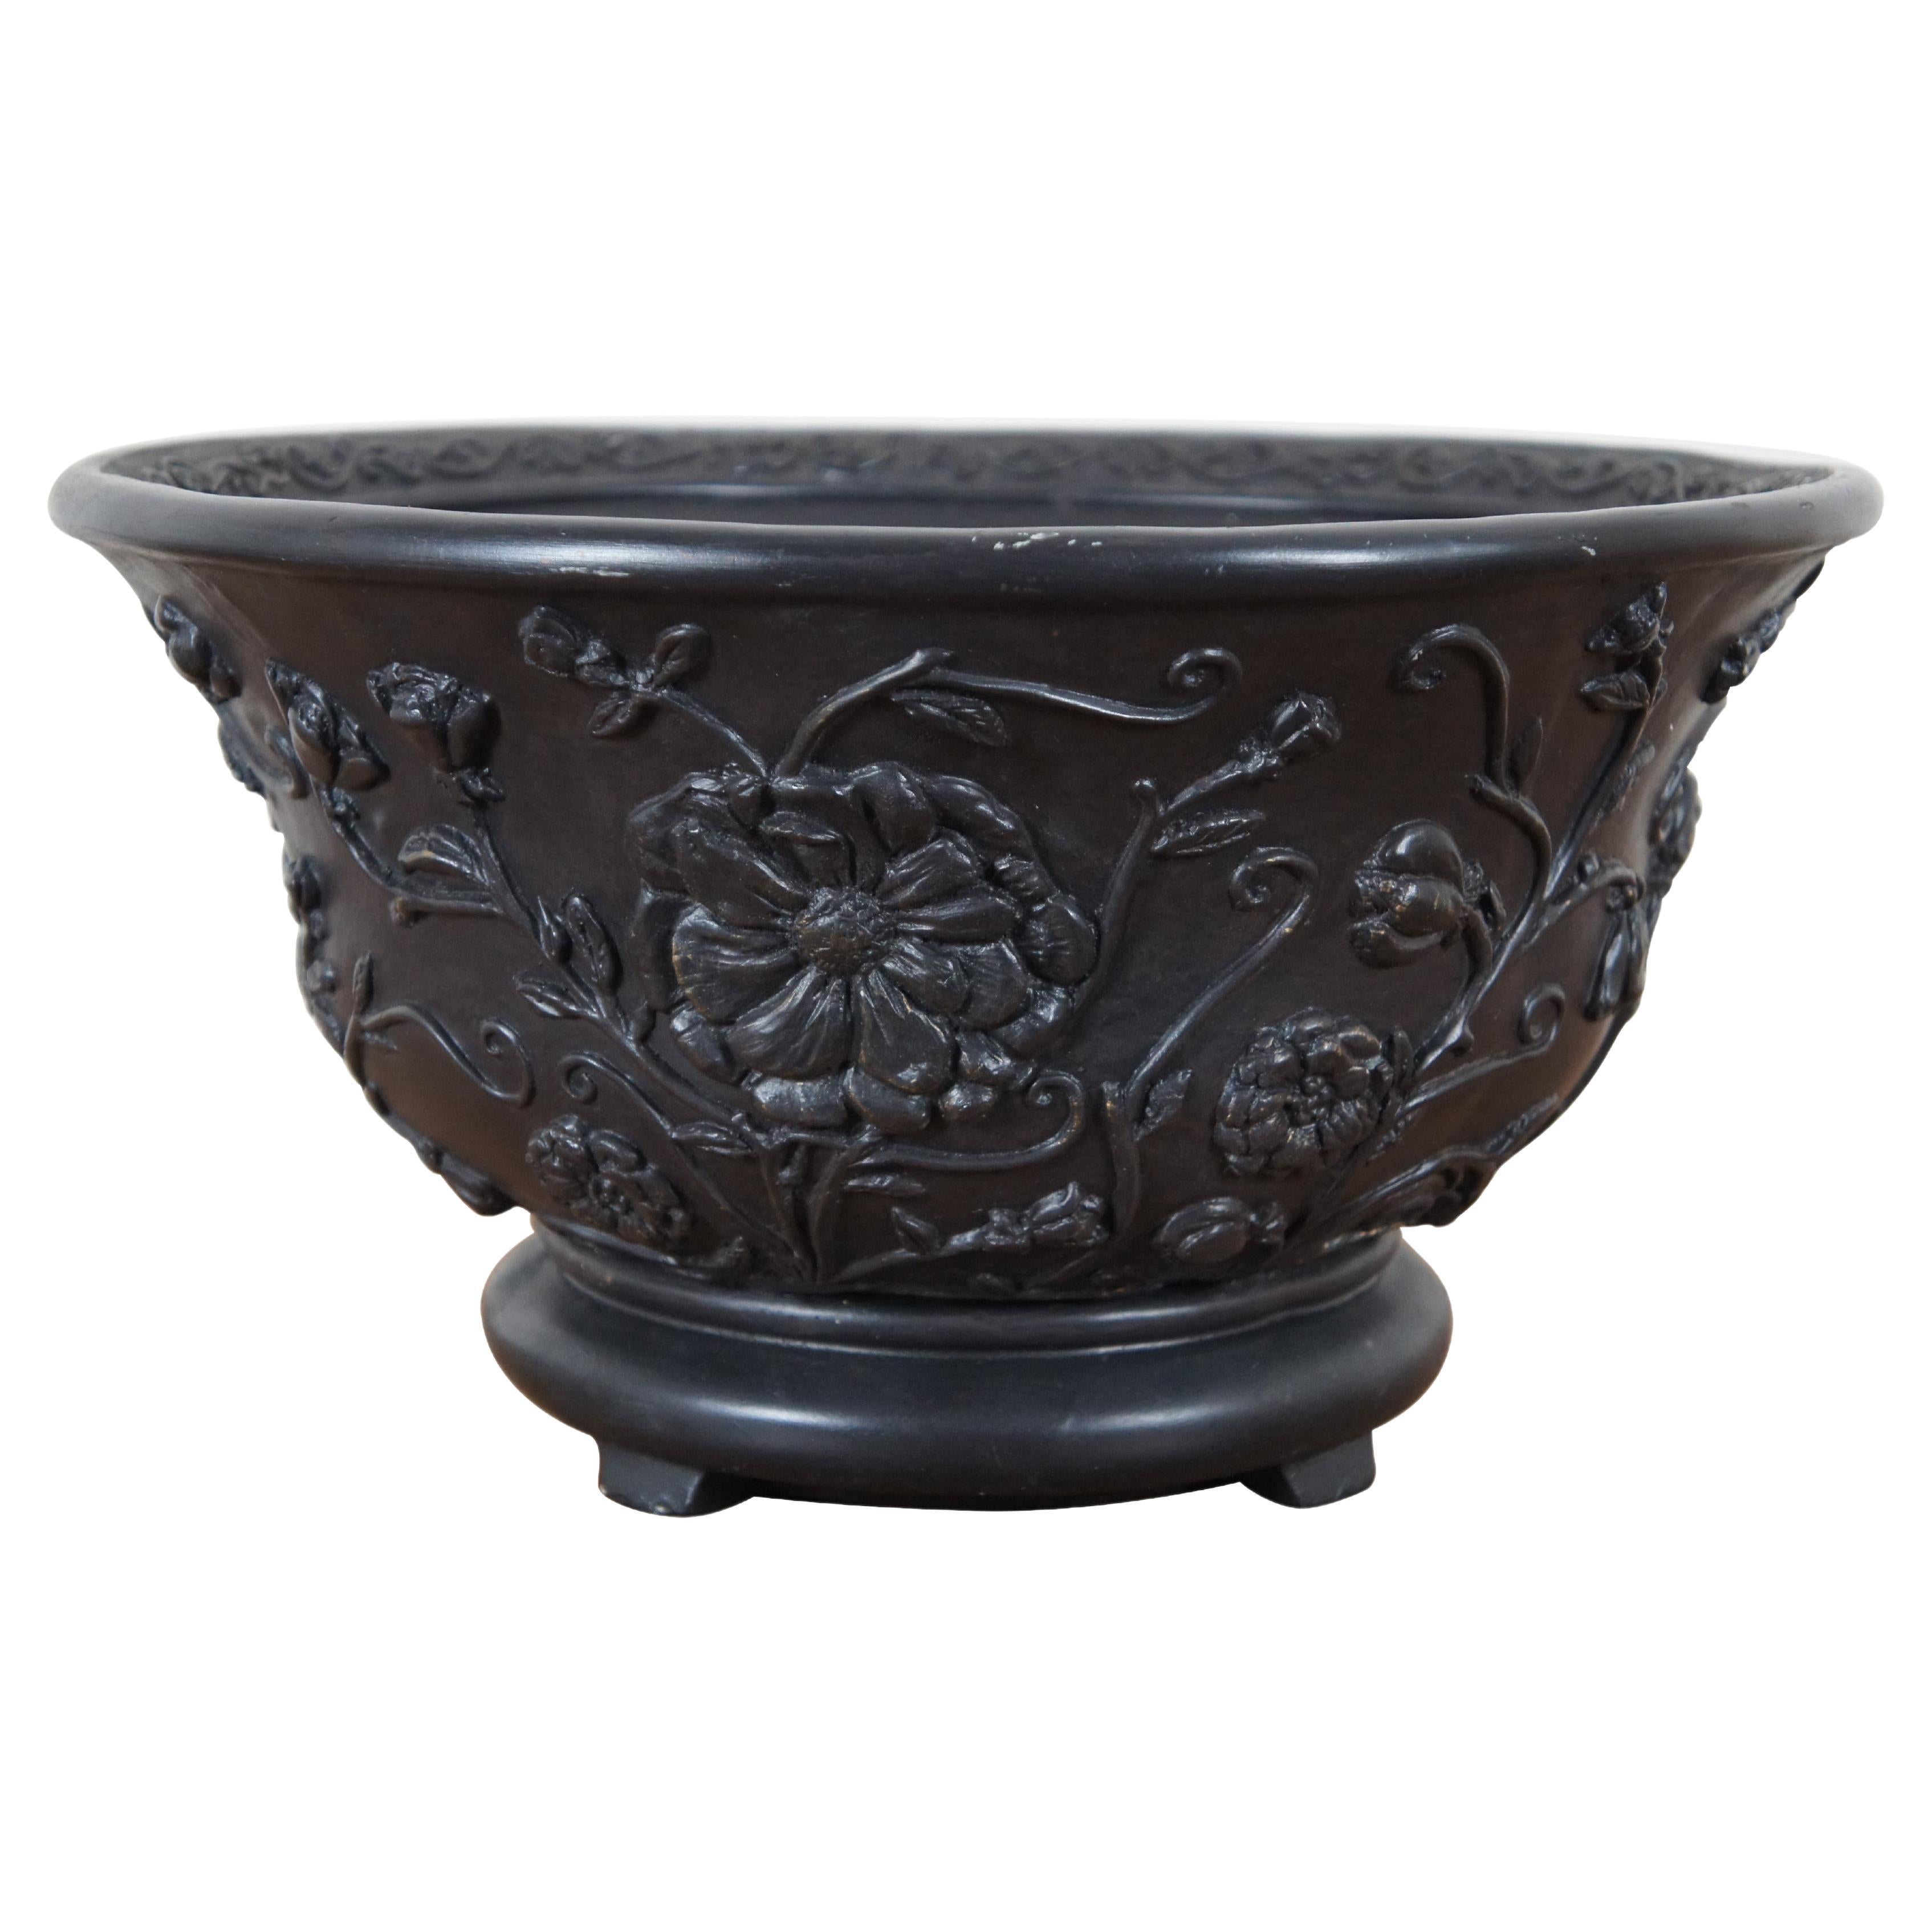 Austin Productions Lower Relief Floral Chinoiserie Centerpiece Bowl Planter 15" For Sale